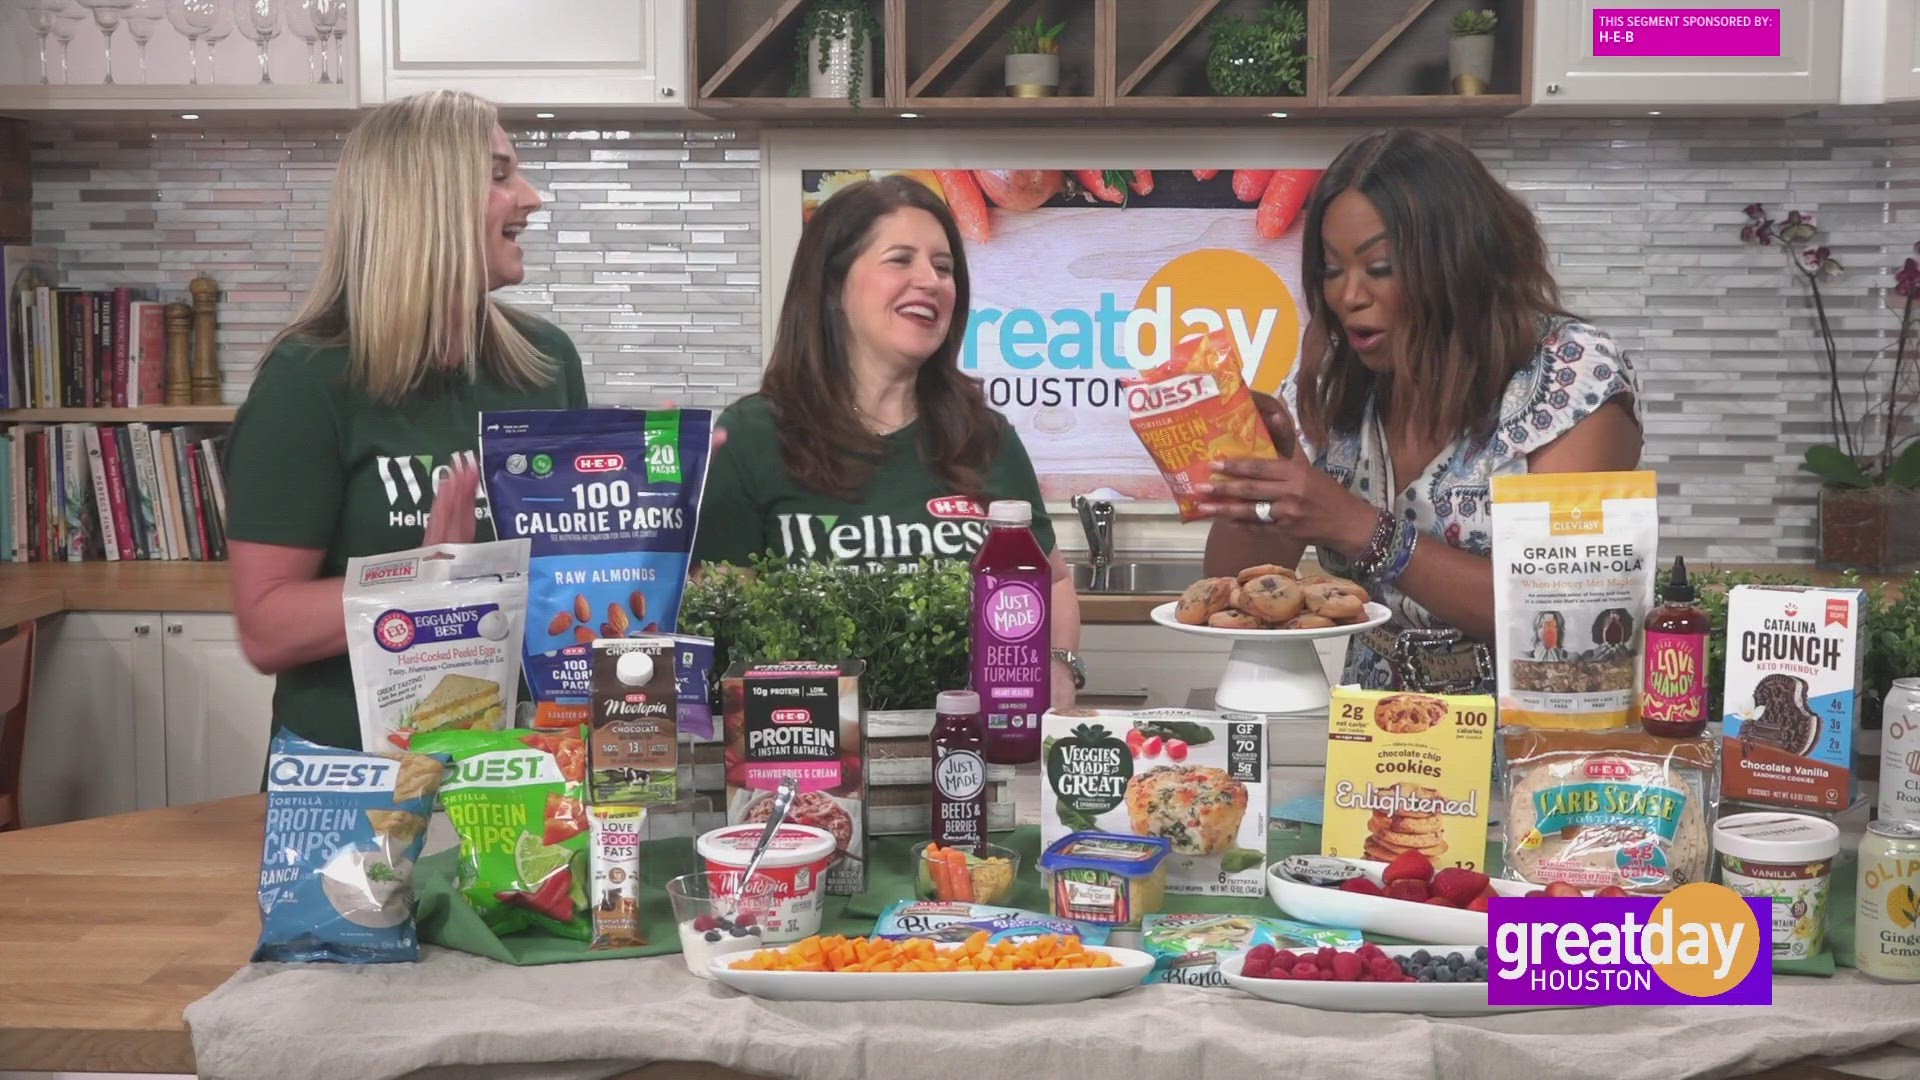 It's International Women's Day and H-E-B Dietician, Stacy Bates and Lisa Helfman join us to share the importance of health and wellness and the products we buy.